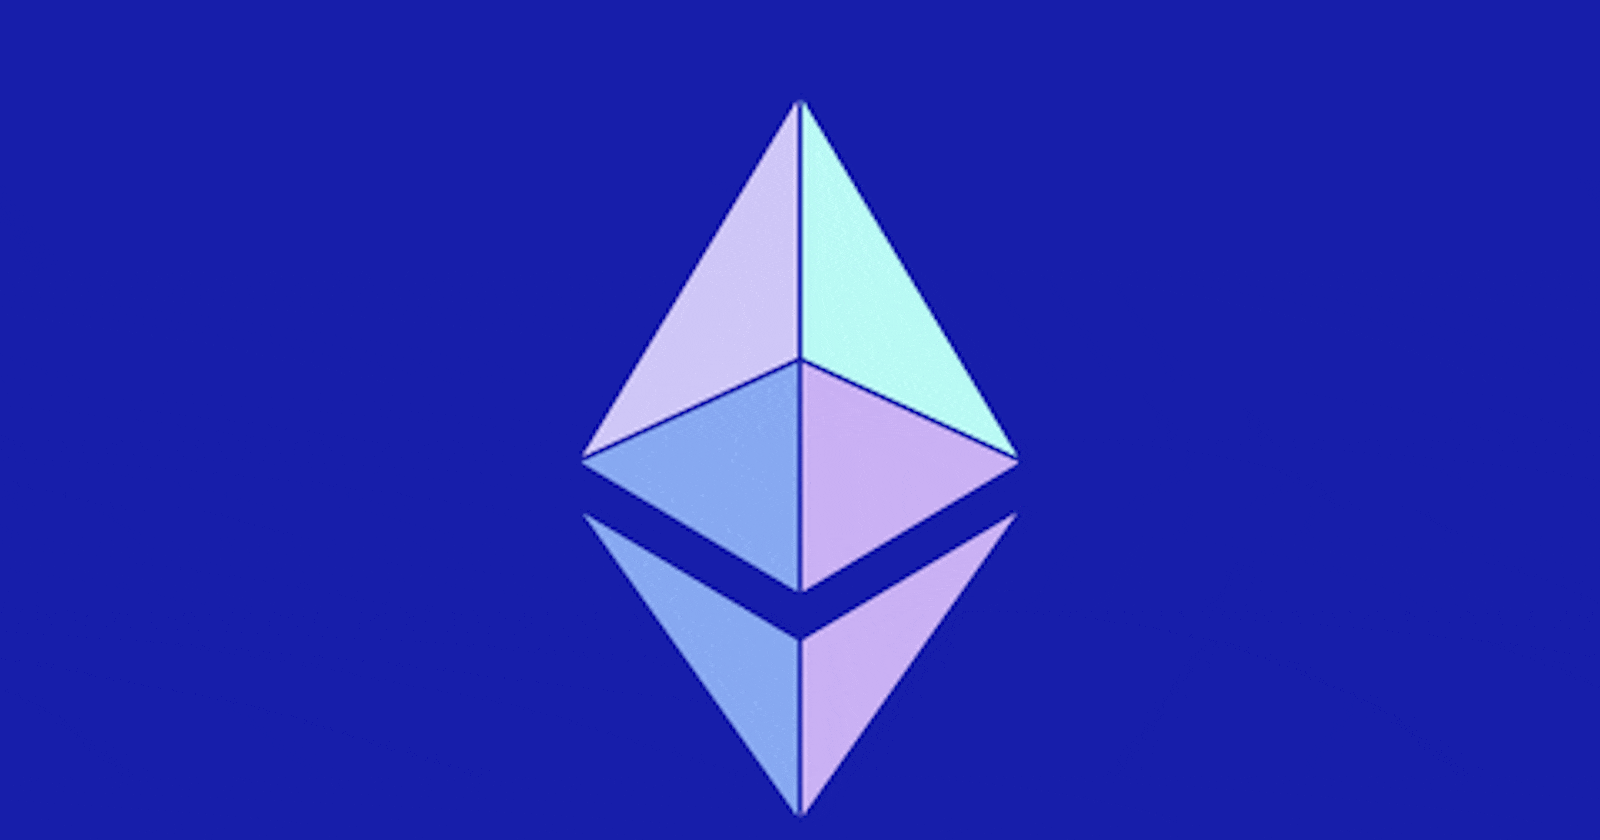 Join the Ethereum Dev Channel on Discord and Connect with the Community